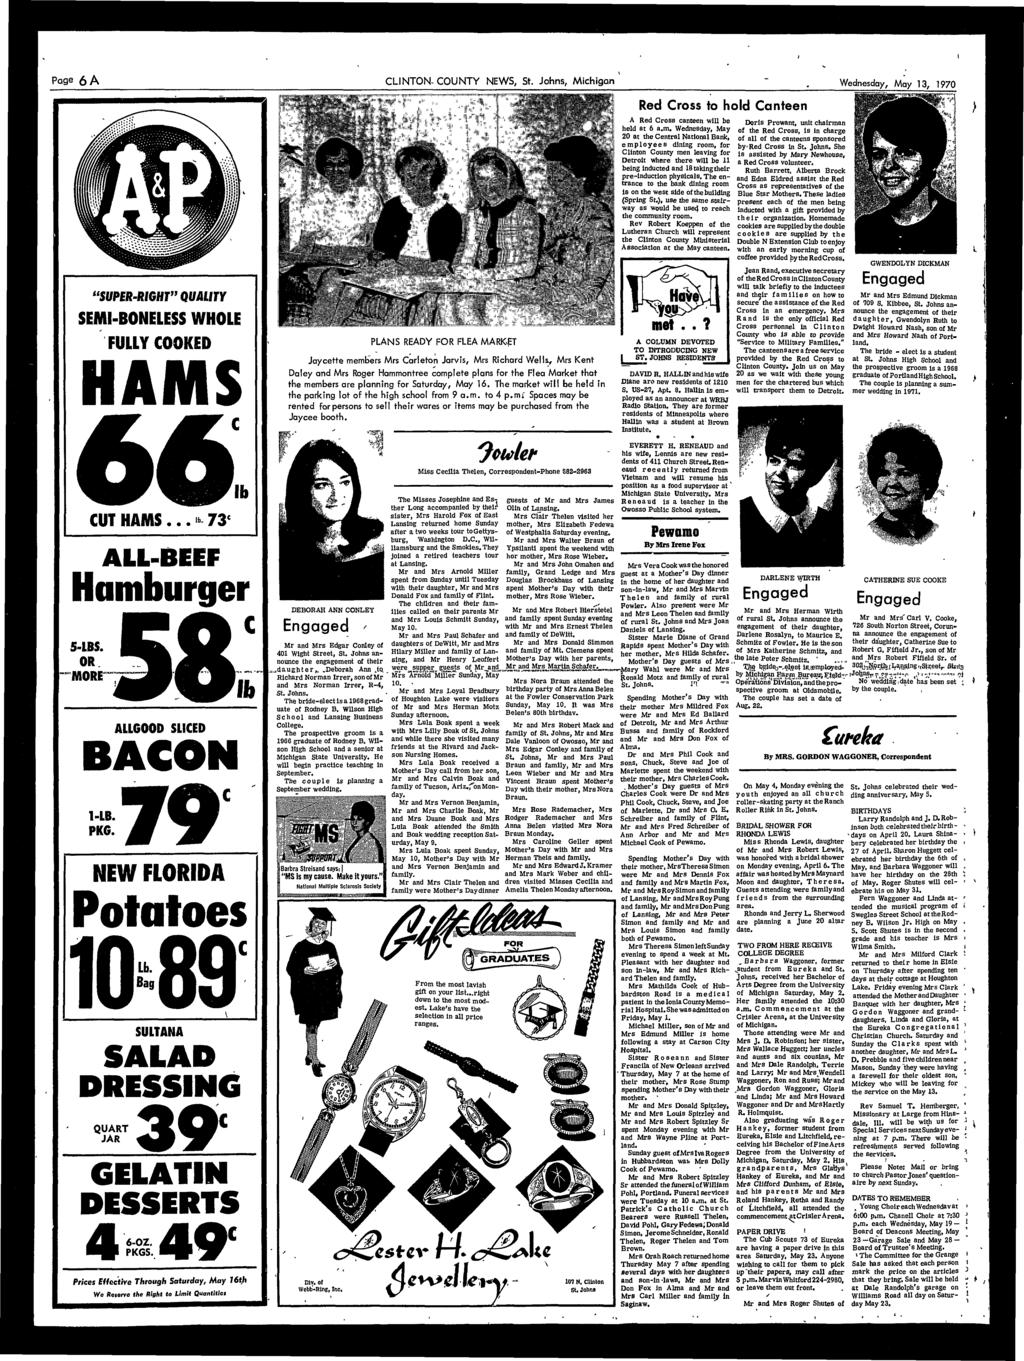 Page 6 A CLINTON-COUNTY NEWS, St. Johns, Michigan Wednesday, May, 1970 "SUPER-RIGHT" QUALITY SEMI-BONELESS WHOIE FULLY COOKED HAMS CUT HAMS...» 73 ALL-BEEF Hamburger 5-LBS.